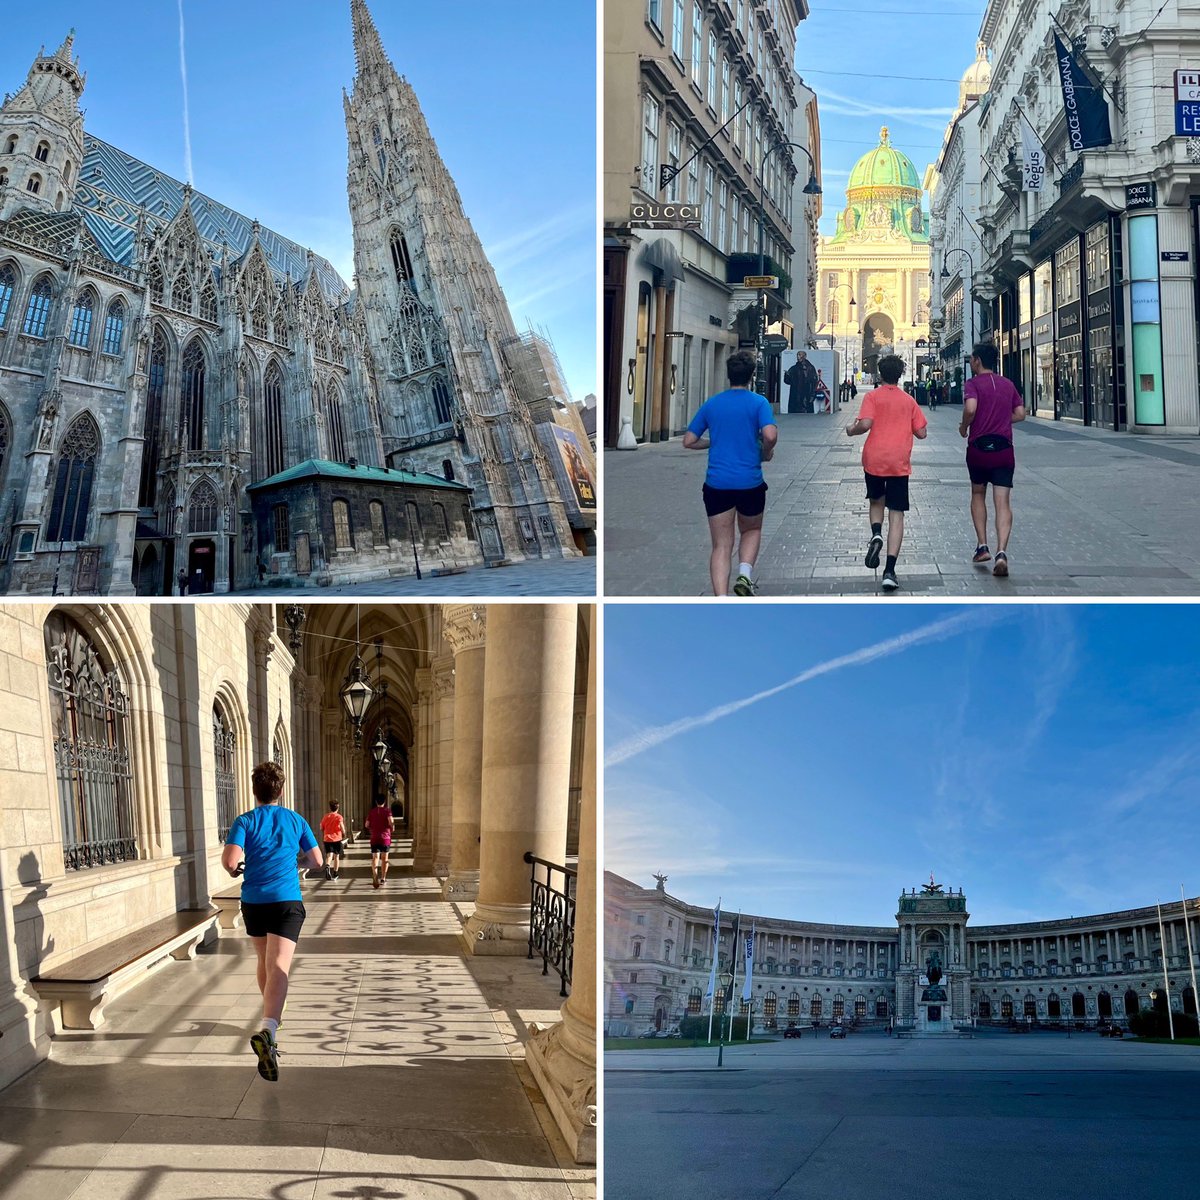 This morning’s family run club 🏃🏼‍♀️🏃🏻‍♂️ - saying goodbye to Vienna before catching the train to Prague & a chance to explore another city & country #NHS1000miles #Holidaytime #CountdowntoGUCR #FundraisingforTASC